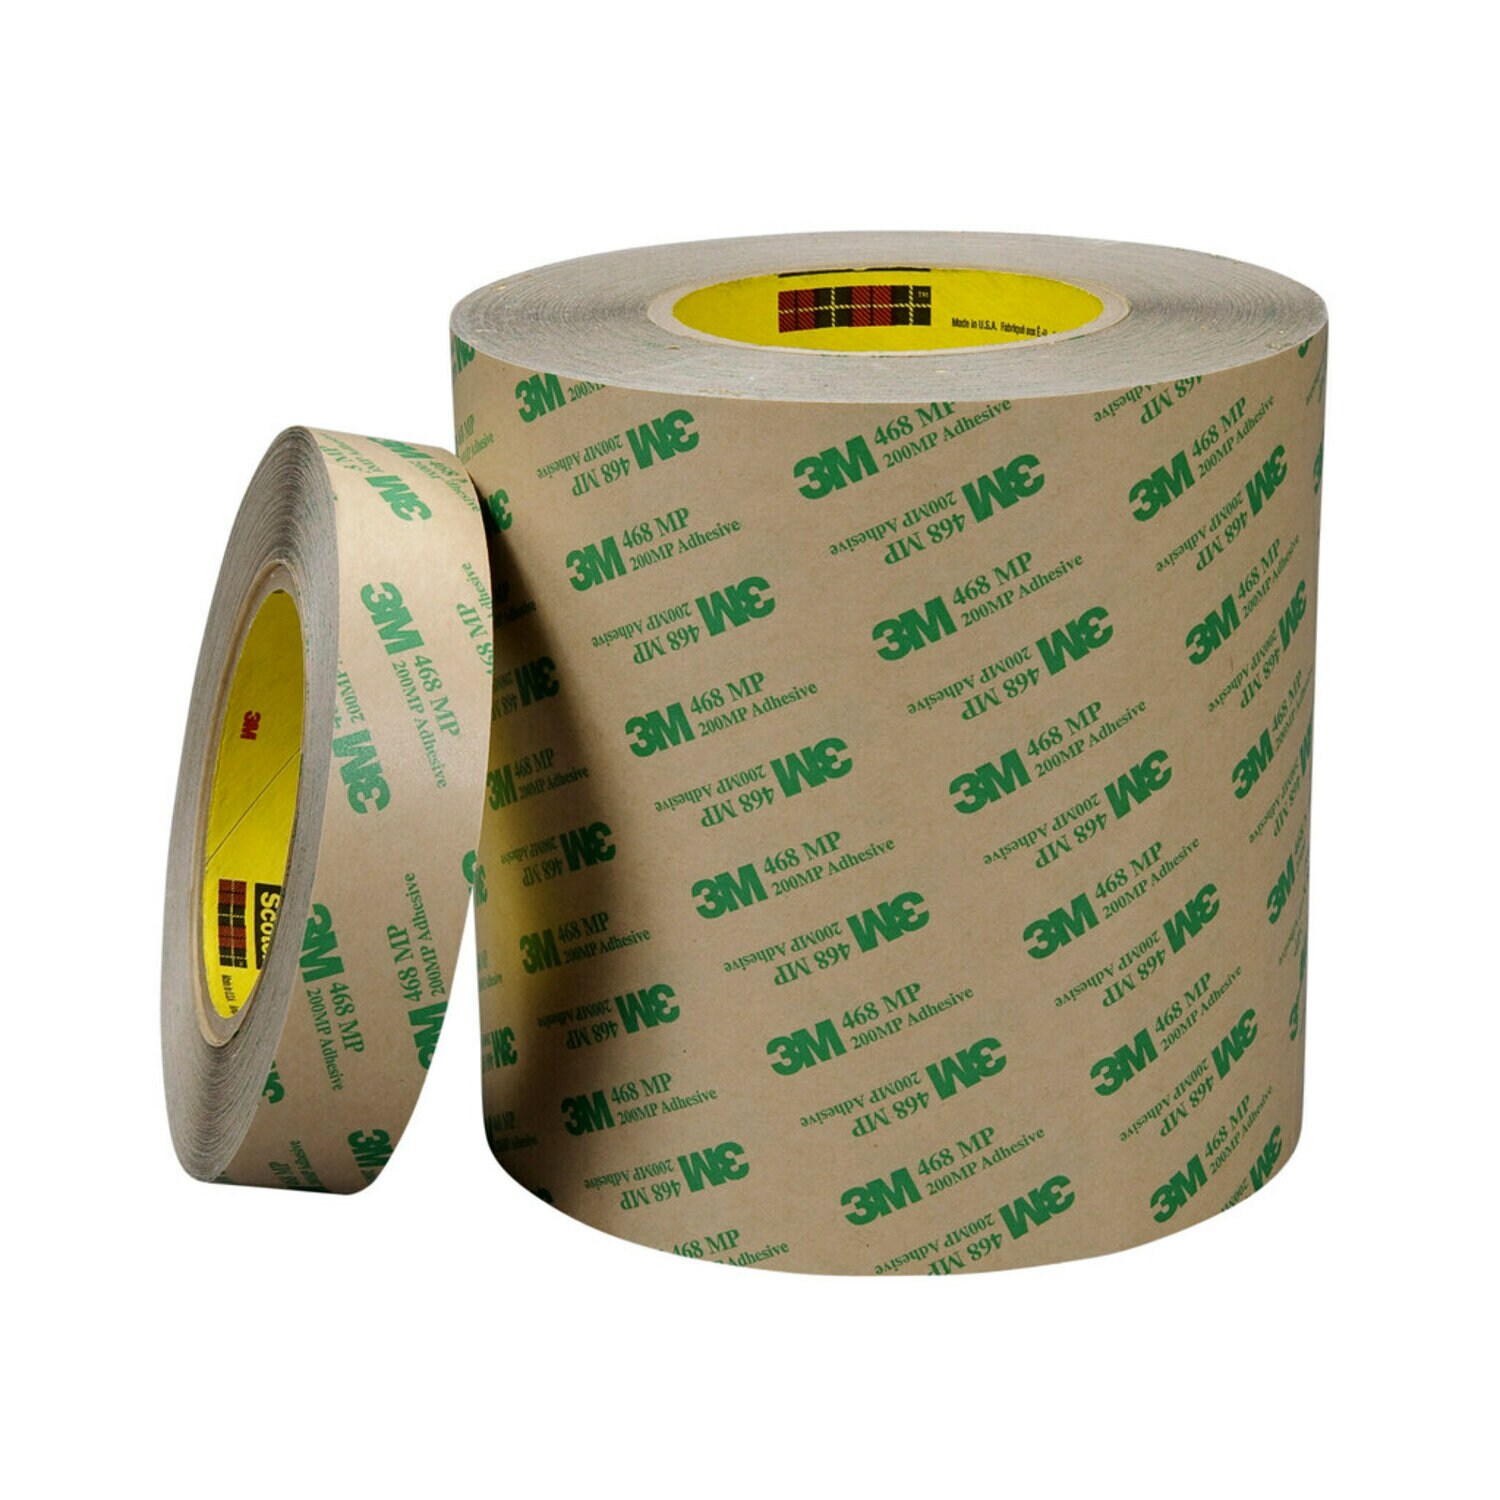 7010334037 - 3M Adhesive Transfer Tape 468MP, Clear, 27 in x 180 yd, 5 Mil, 1/Case